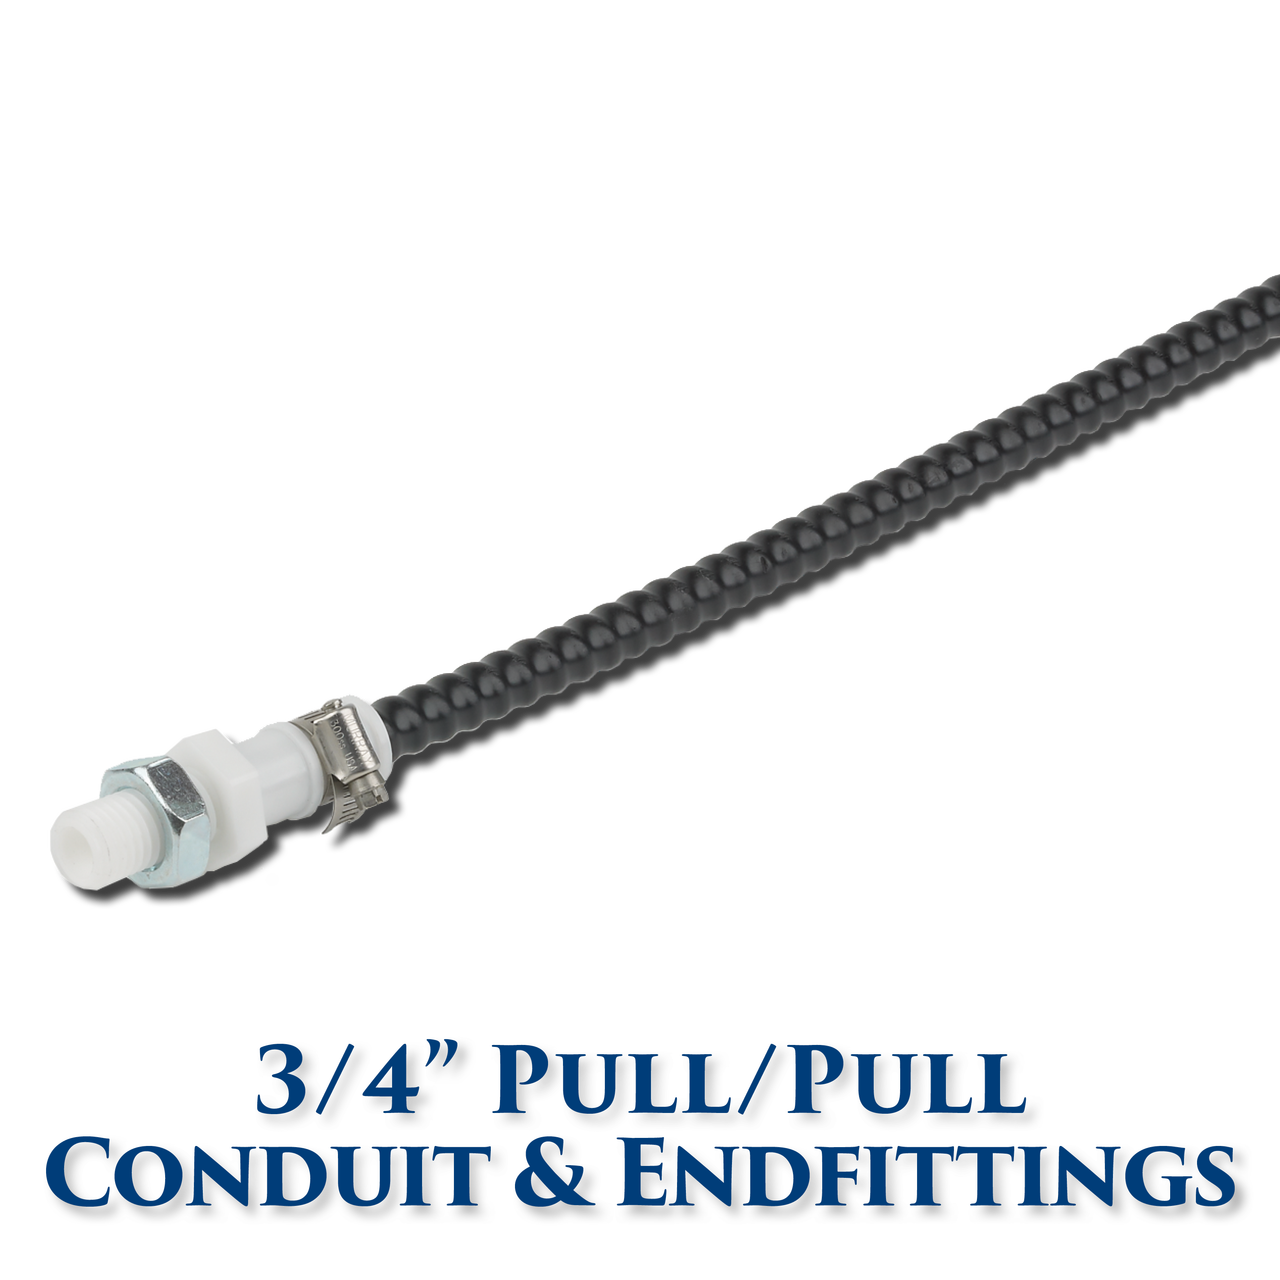 15 foot length - 3/4 Pull/Pull Conduit for 3/16 and 1/4 Wire Rope  (includes two end fittings)